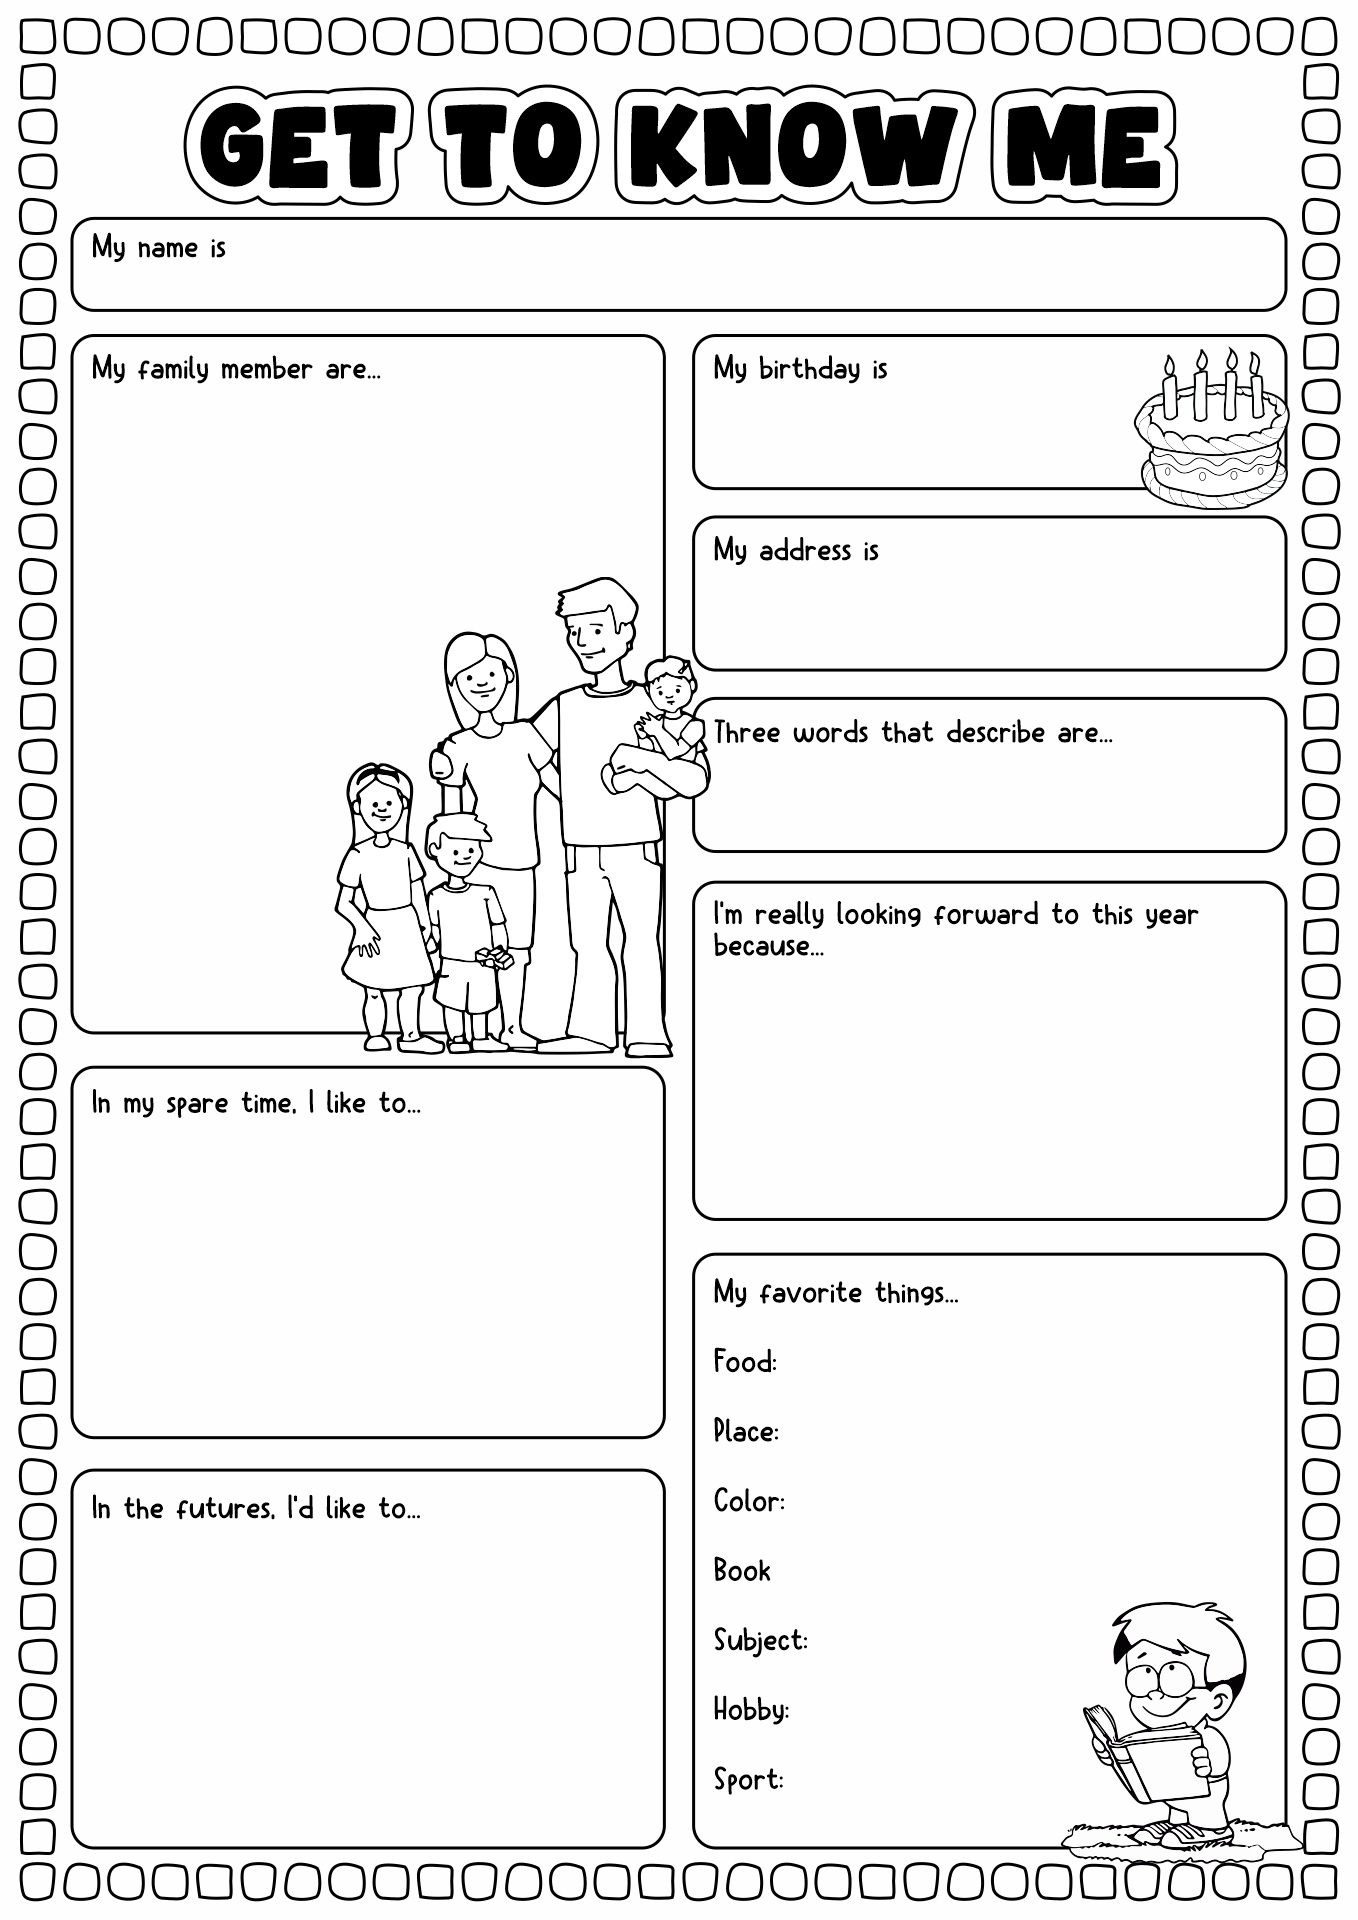 Getting to Know You Worksheet Middle School Image